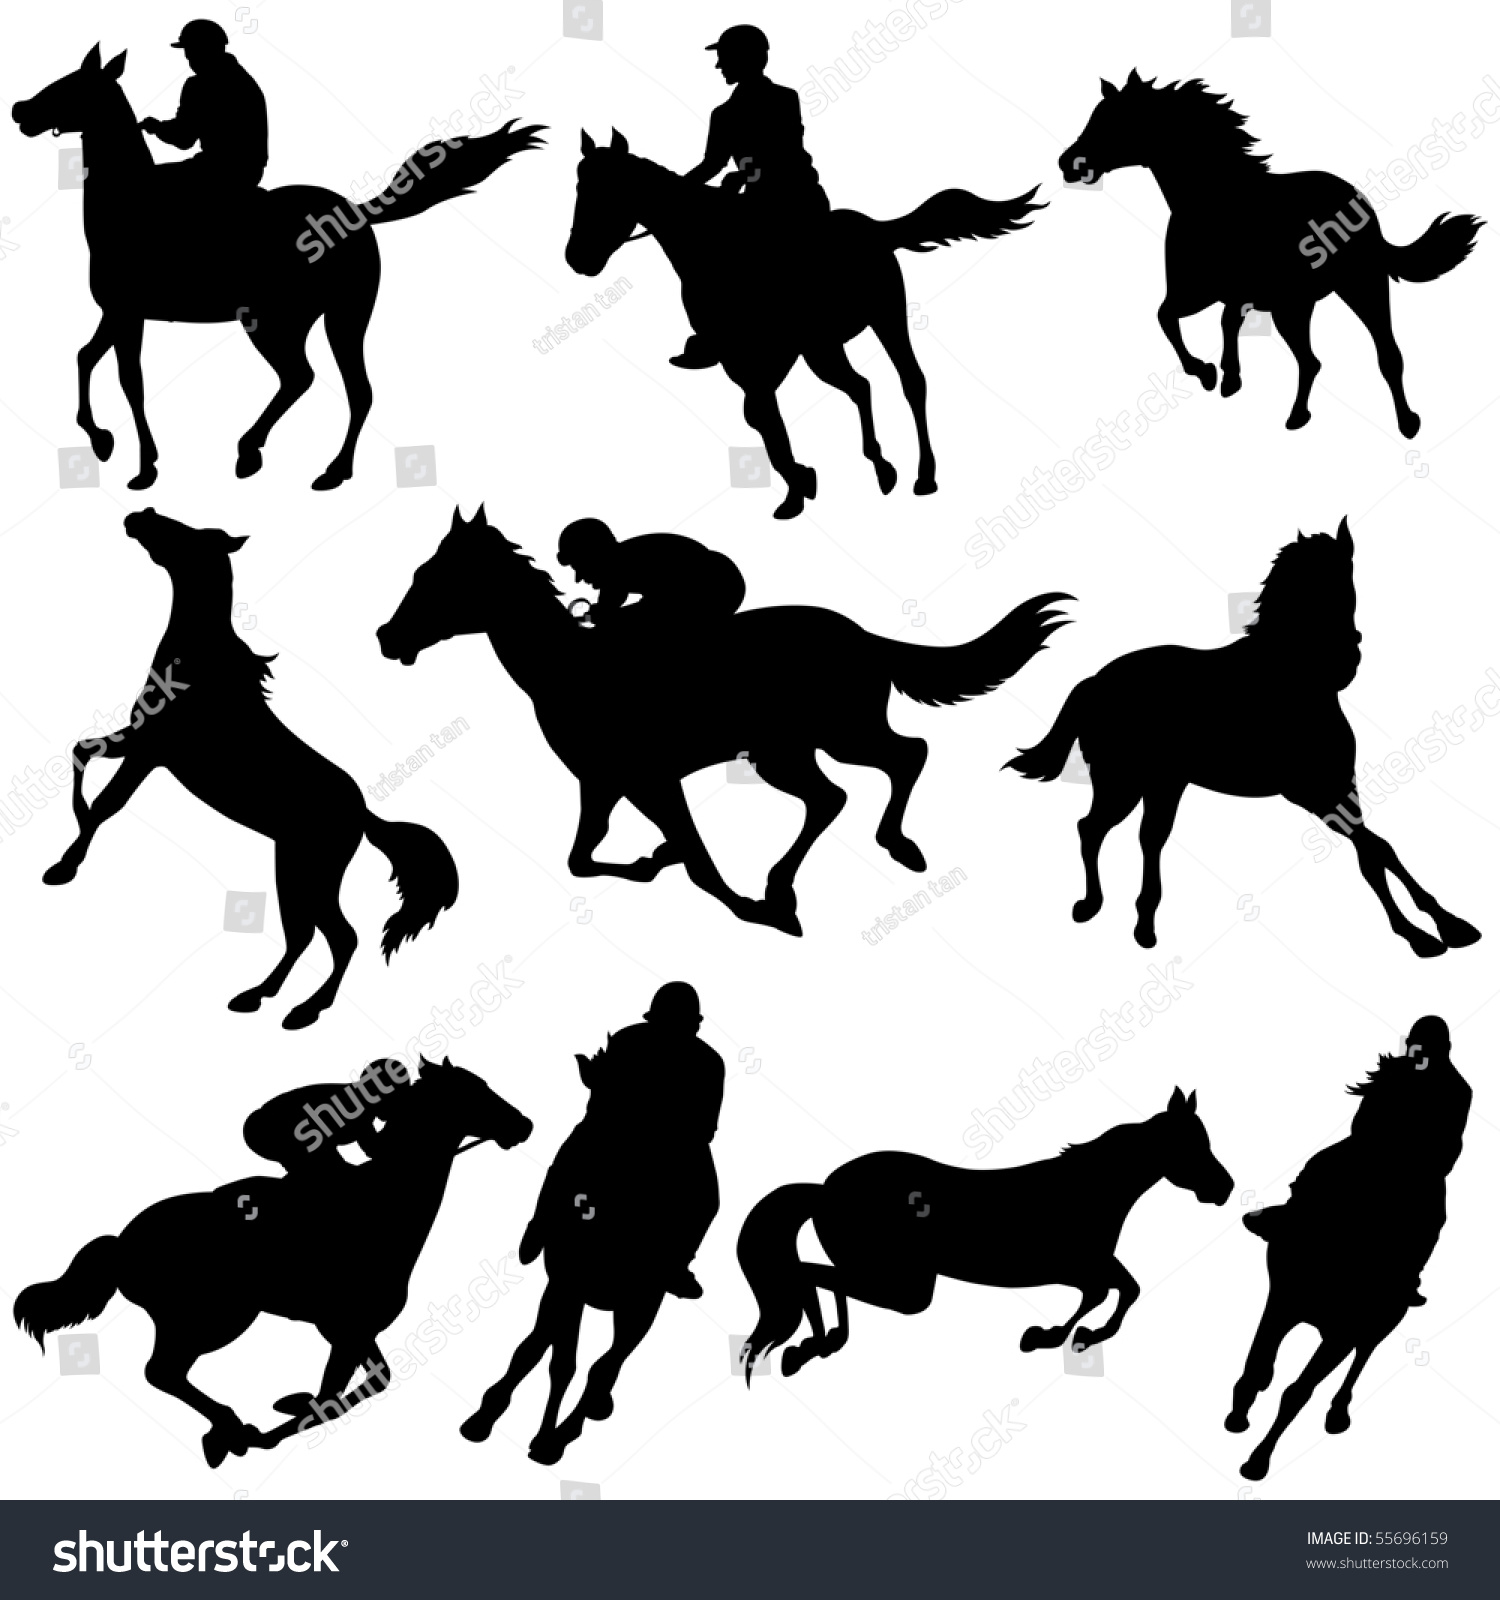 Download Vector Silhouettes Horse Racing Stock Vector 55696159 ...